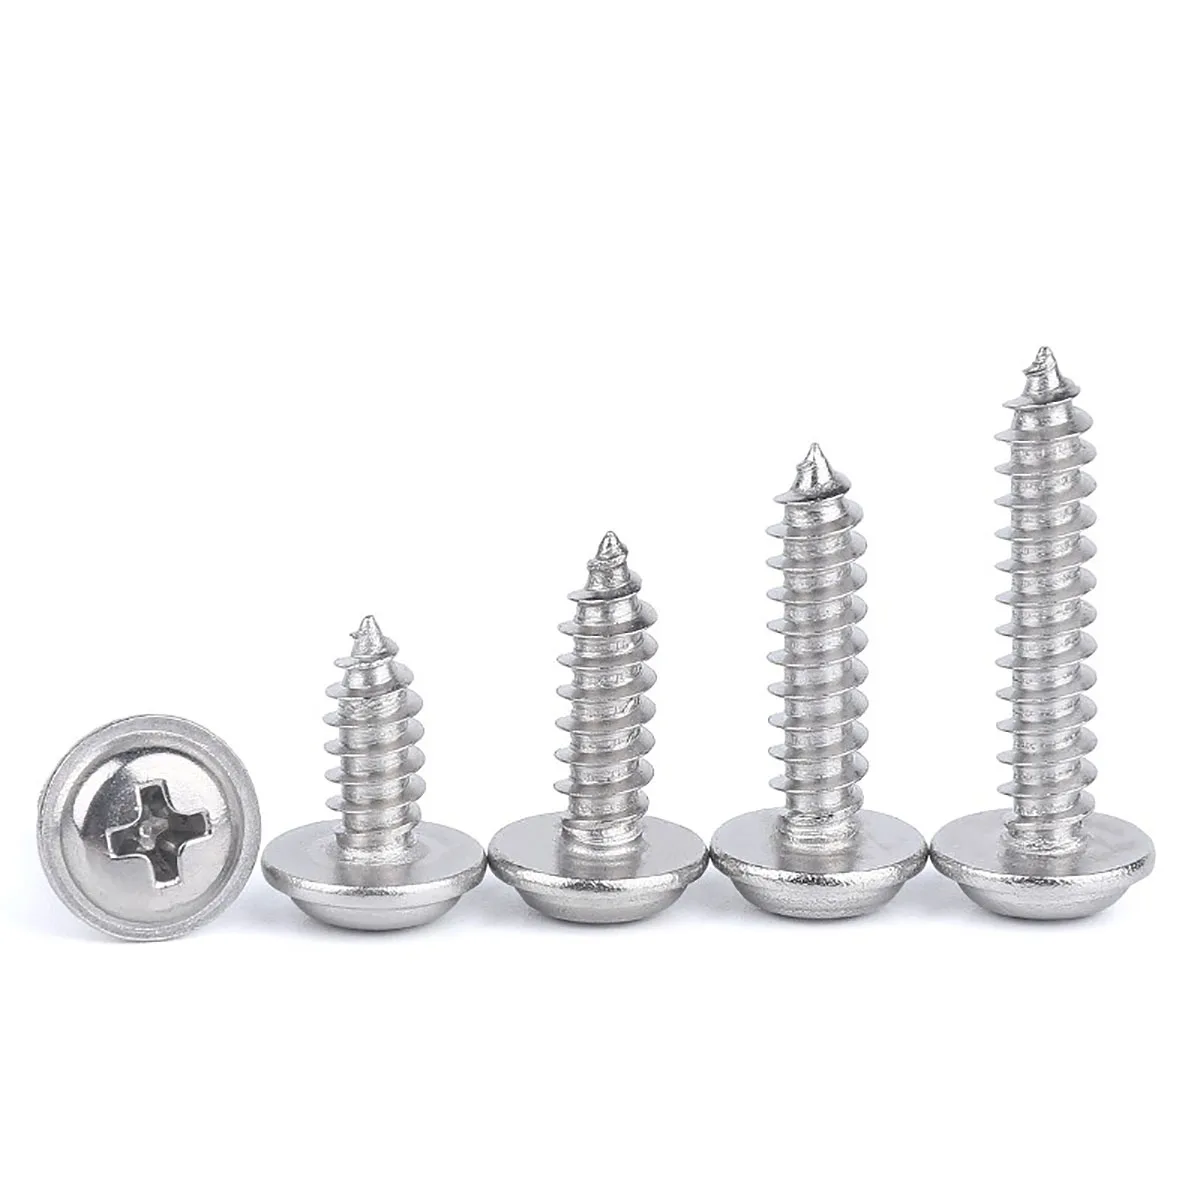 M2 M2.3 M2.6 M3 M4 A2 304 Stainless Steel PWA Cross Phillips Pan Round Head With Washer Collar Self Tapping Screws